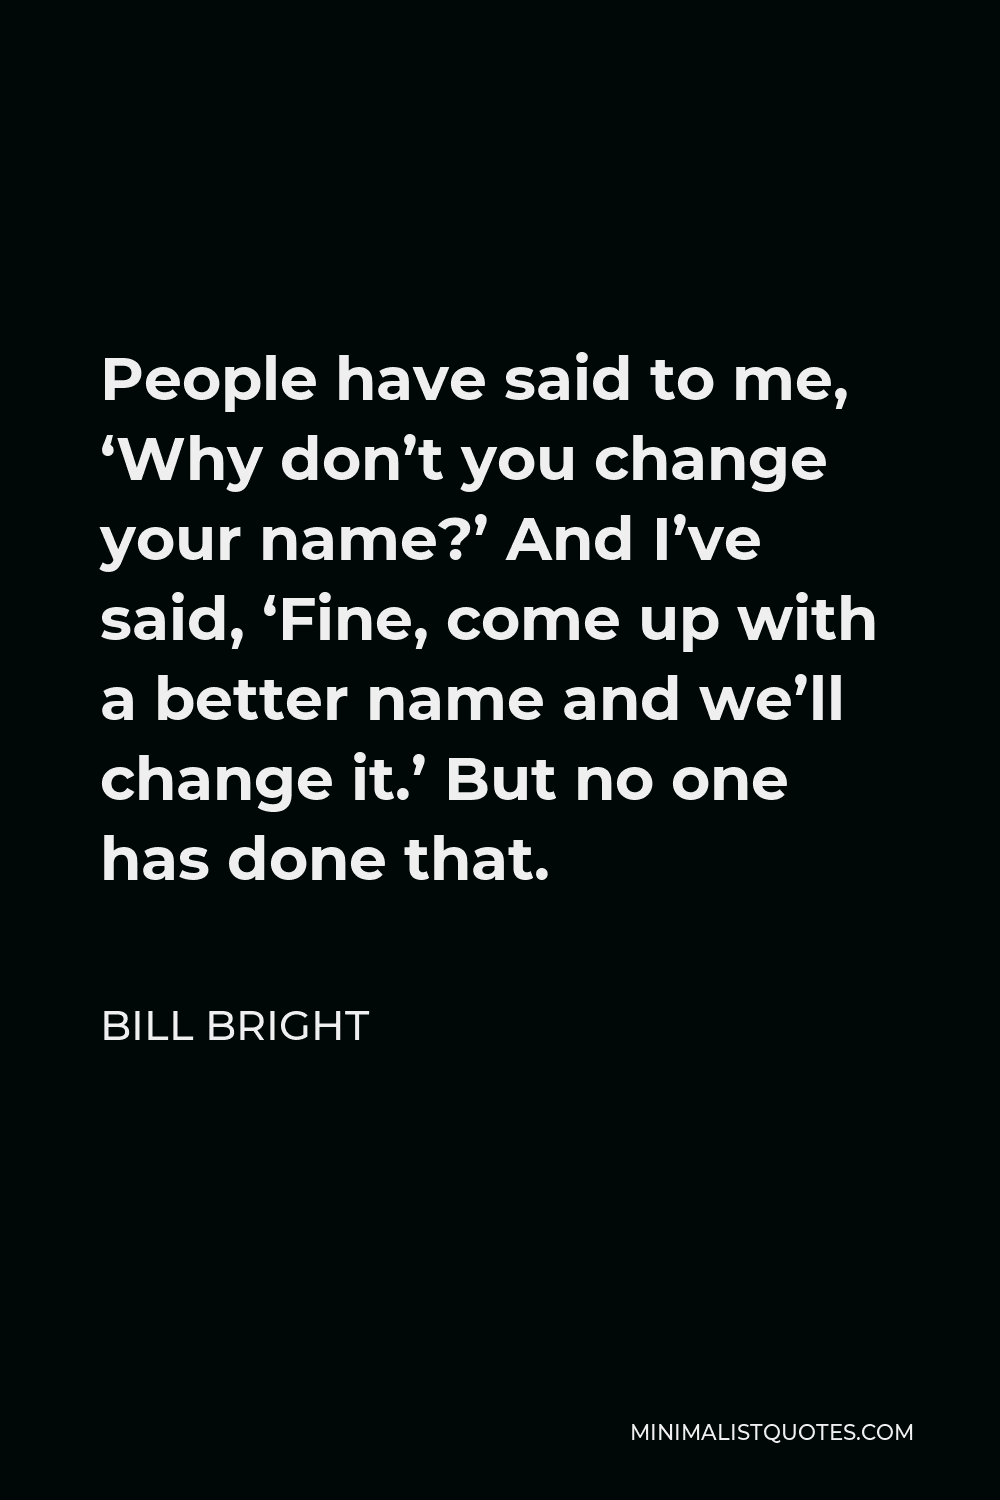 Bill Bright Quote - People have said to me, ‘Why don’t you change your name?’ And I’ve said, ‘Fine, come up with a better name and we’ll change it.’ But no one has done that.